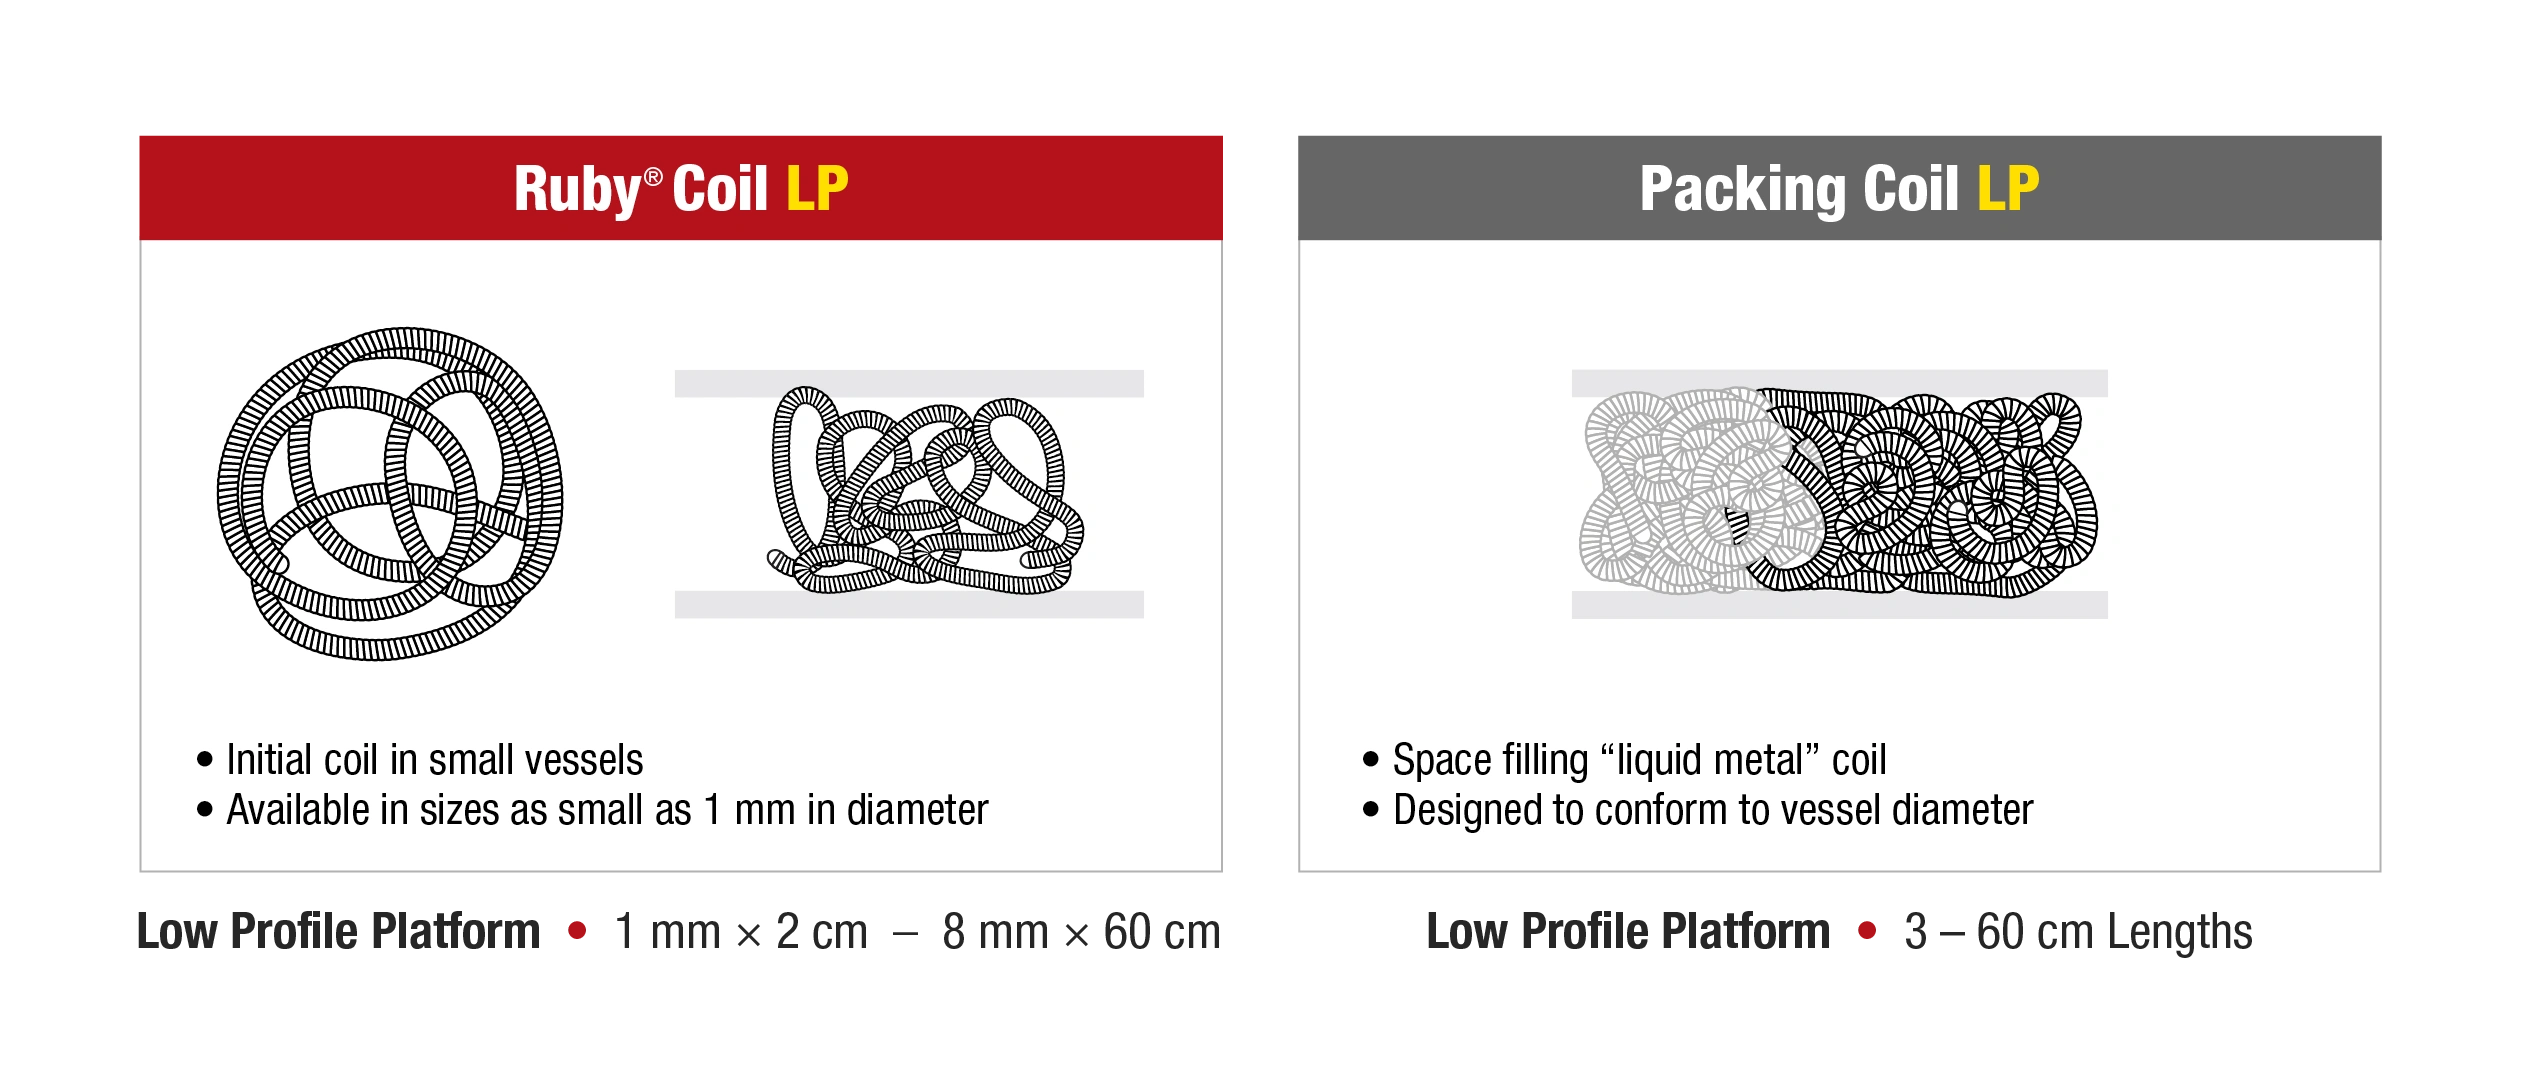 Diagram of illustration explaining the LP Embolization System sizes, dimensions, and usage (information found below) with text "Ruby Coil LP - Initial coil in small vessels - Available in sizes as small as 1 mm in diameter" and "Packing Coil LP - Space filling liquid metal coil - designed to conform to vessel diameter"